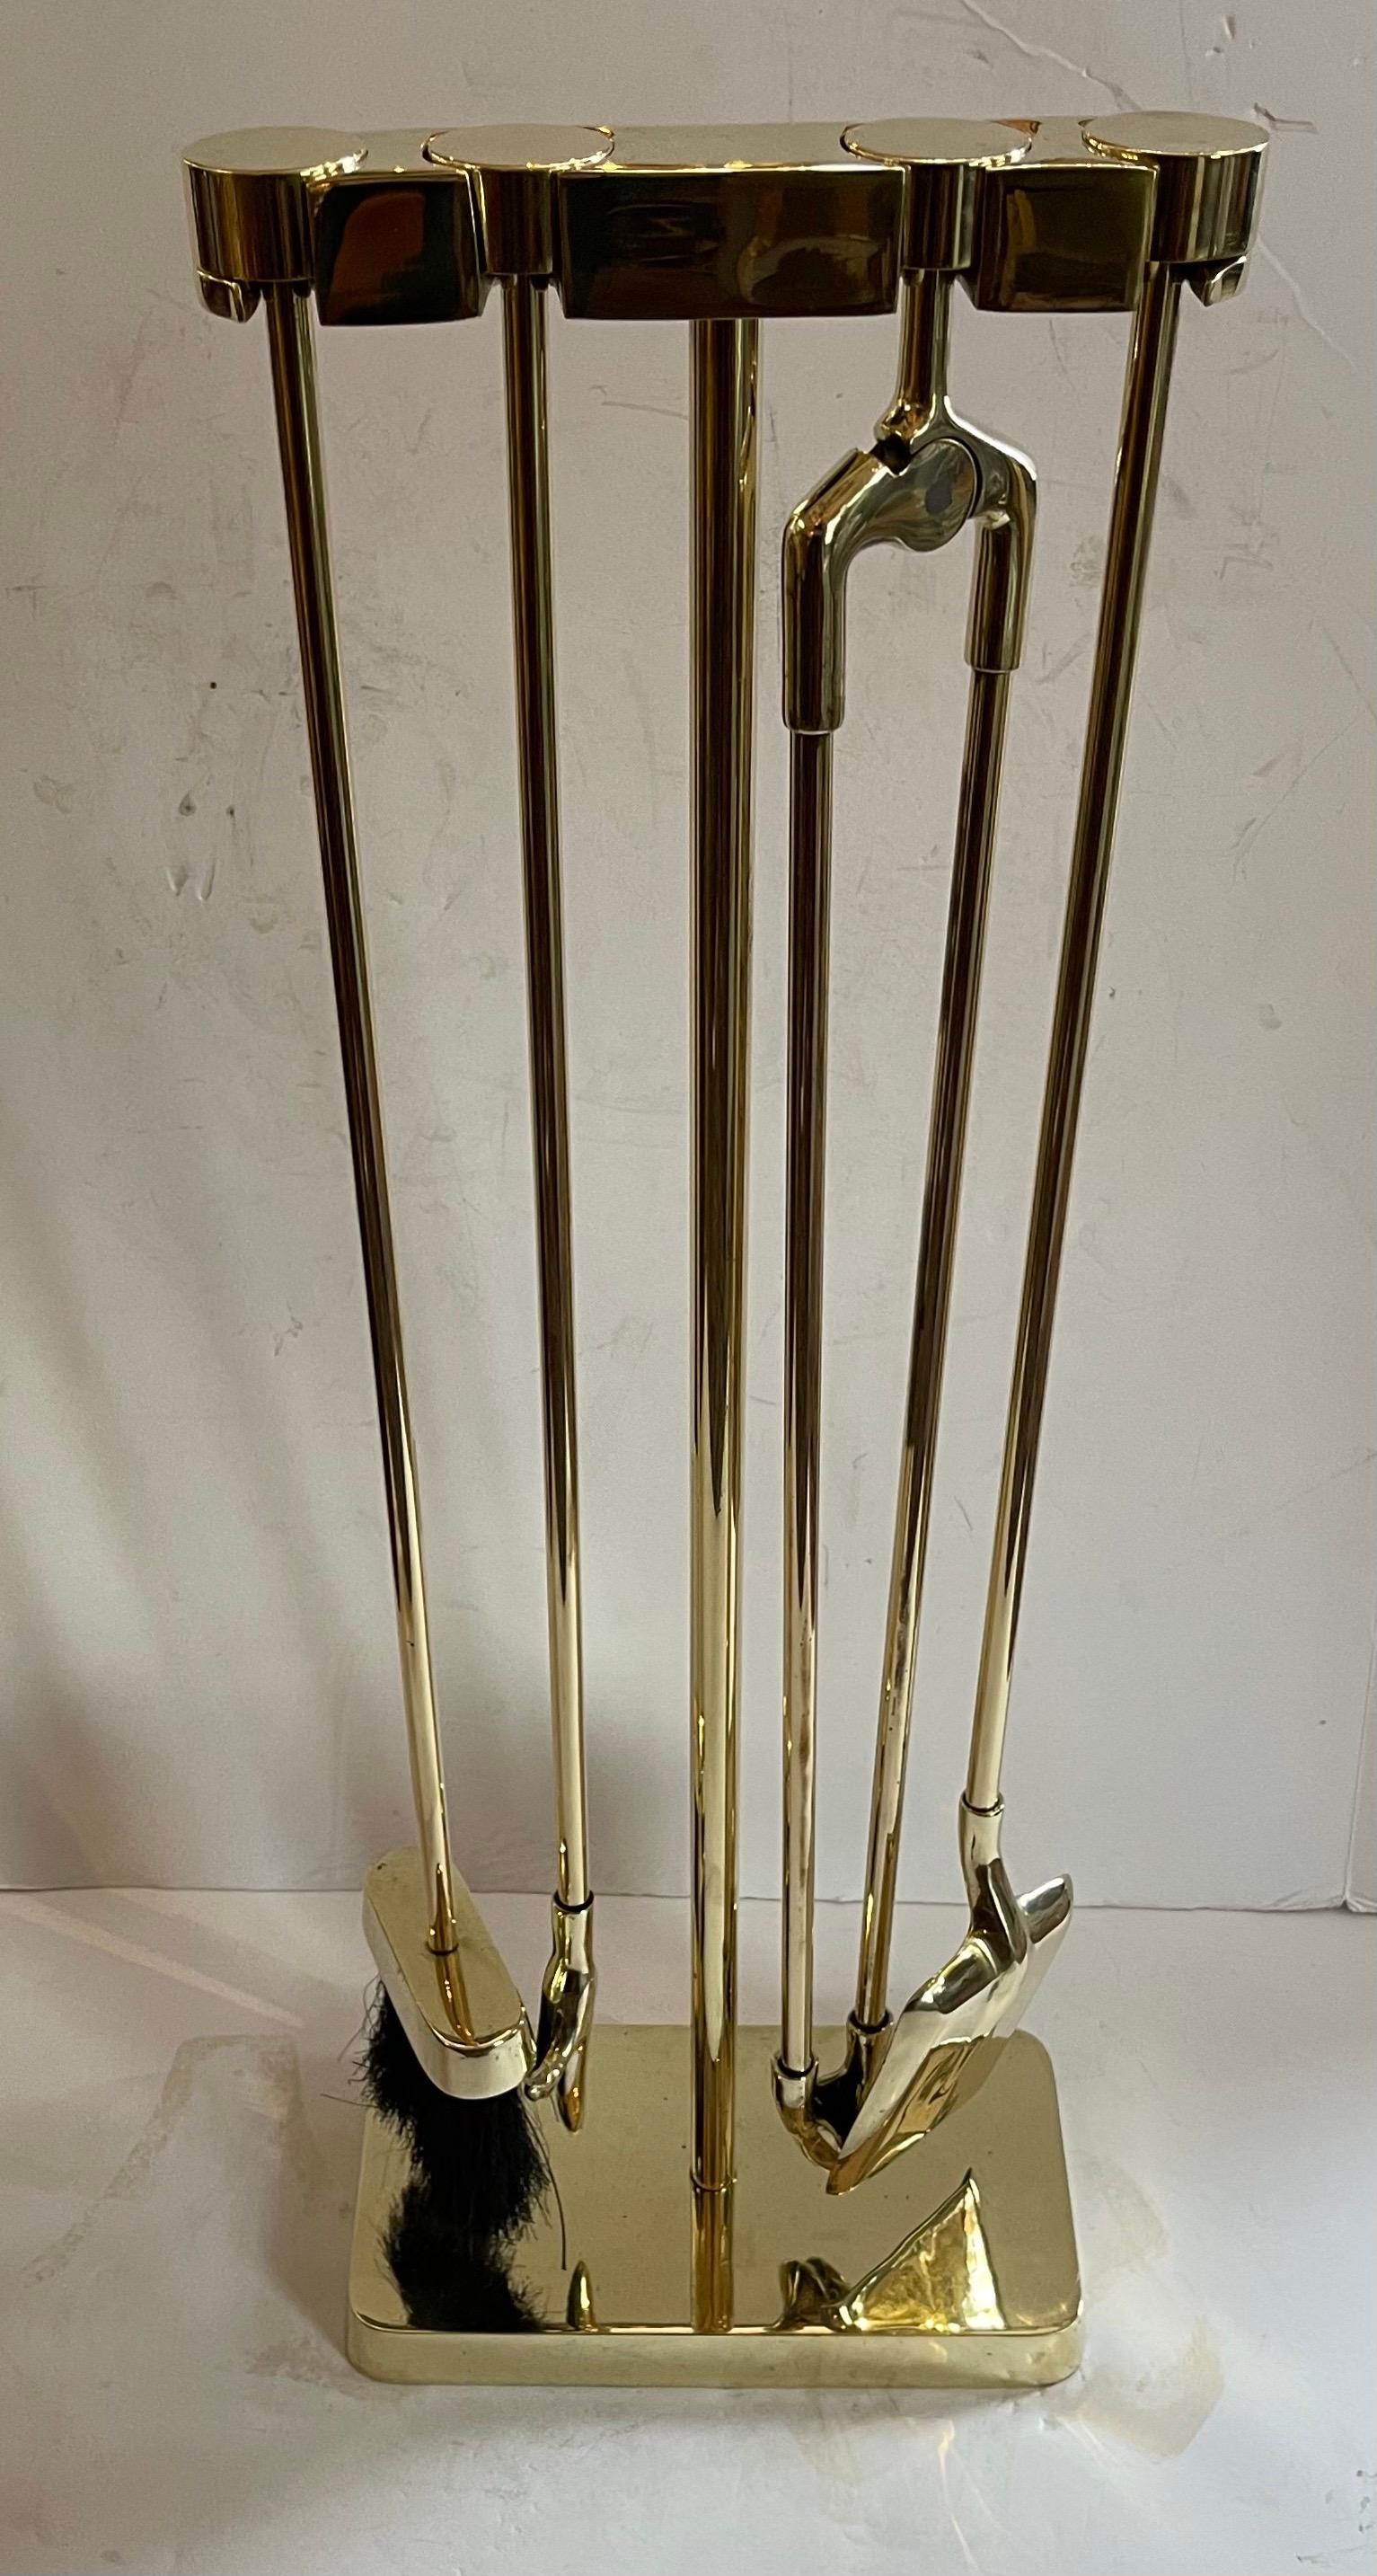 Wonderful Mid-Century Modern Polished Brass Fireplace Fire Place Tool Set In Good Condition For Sale In Roslyn, NY